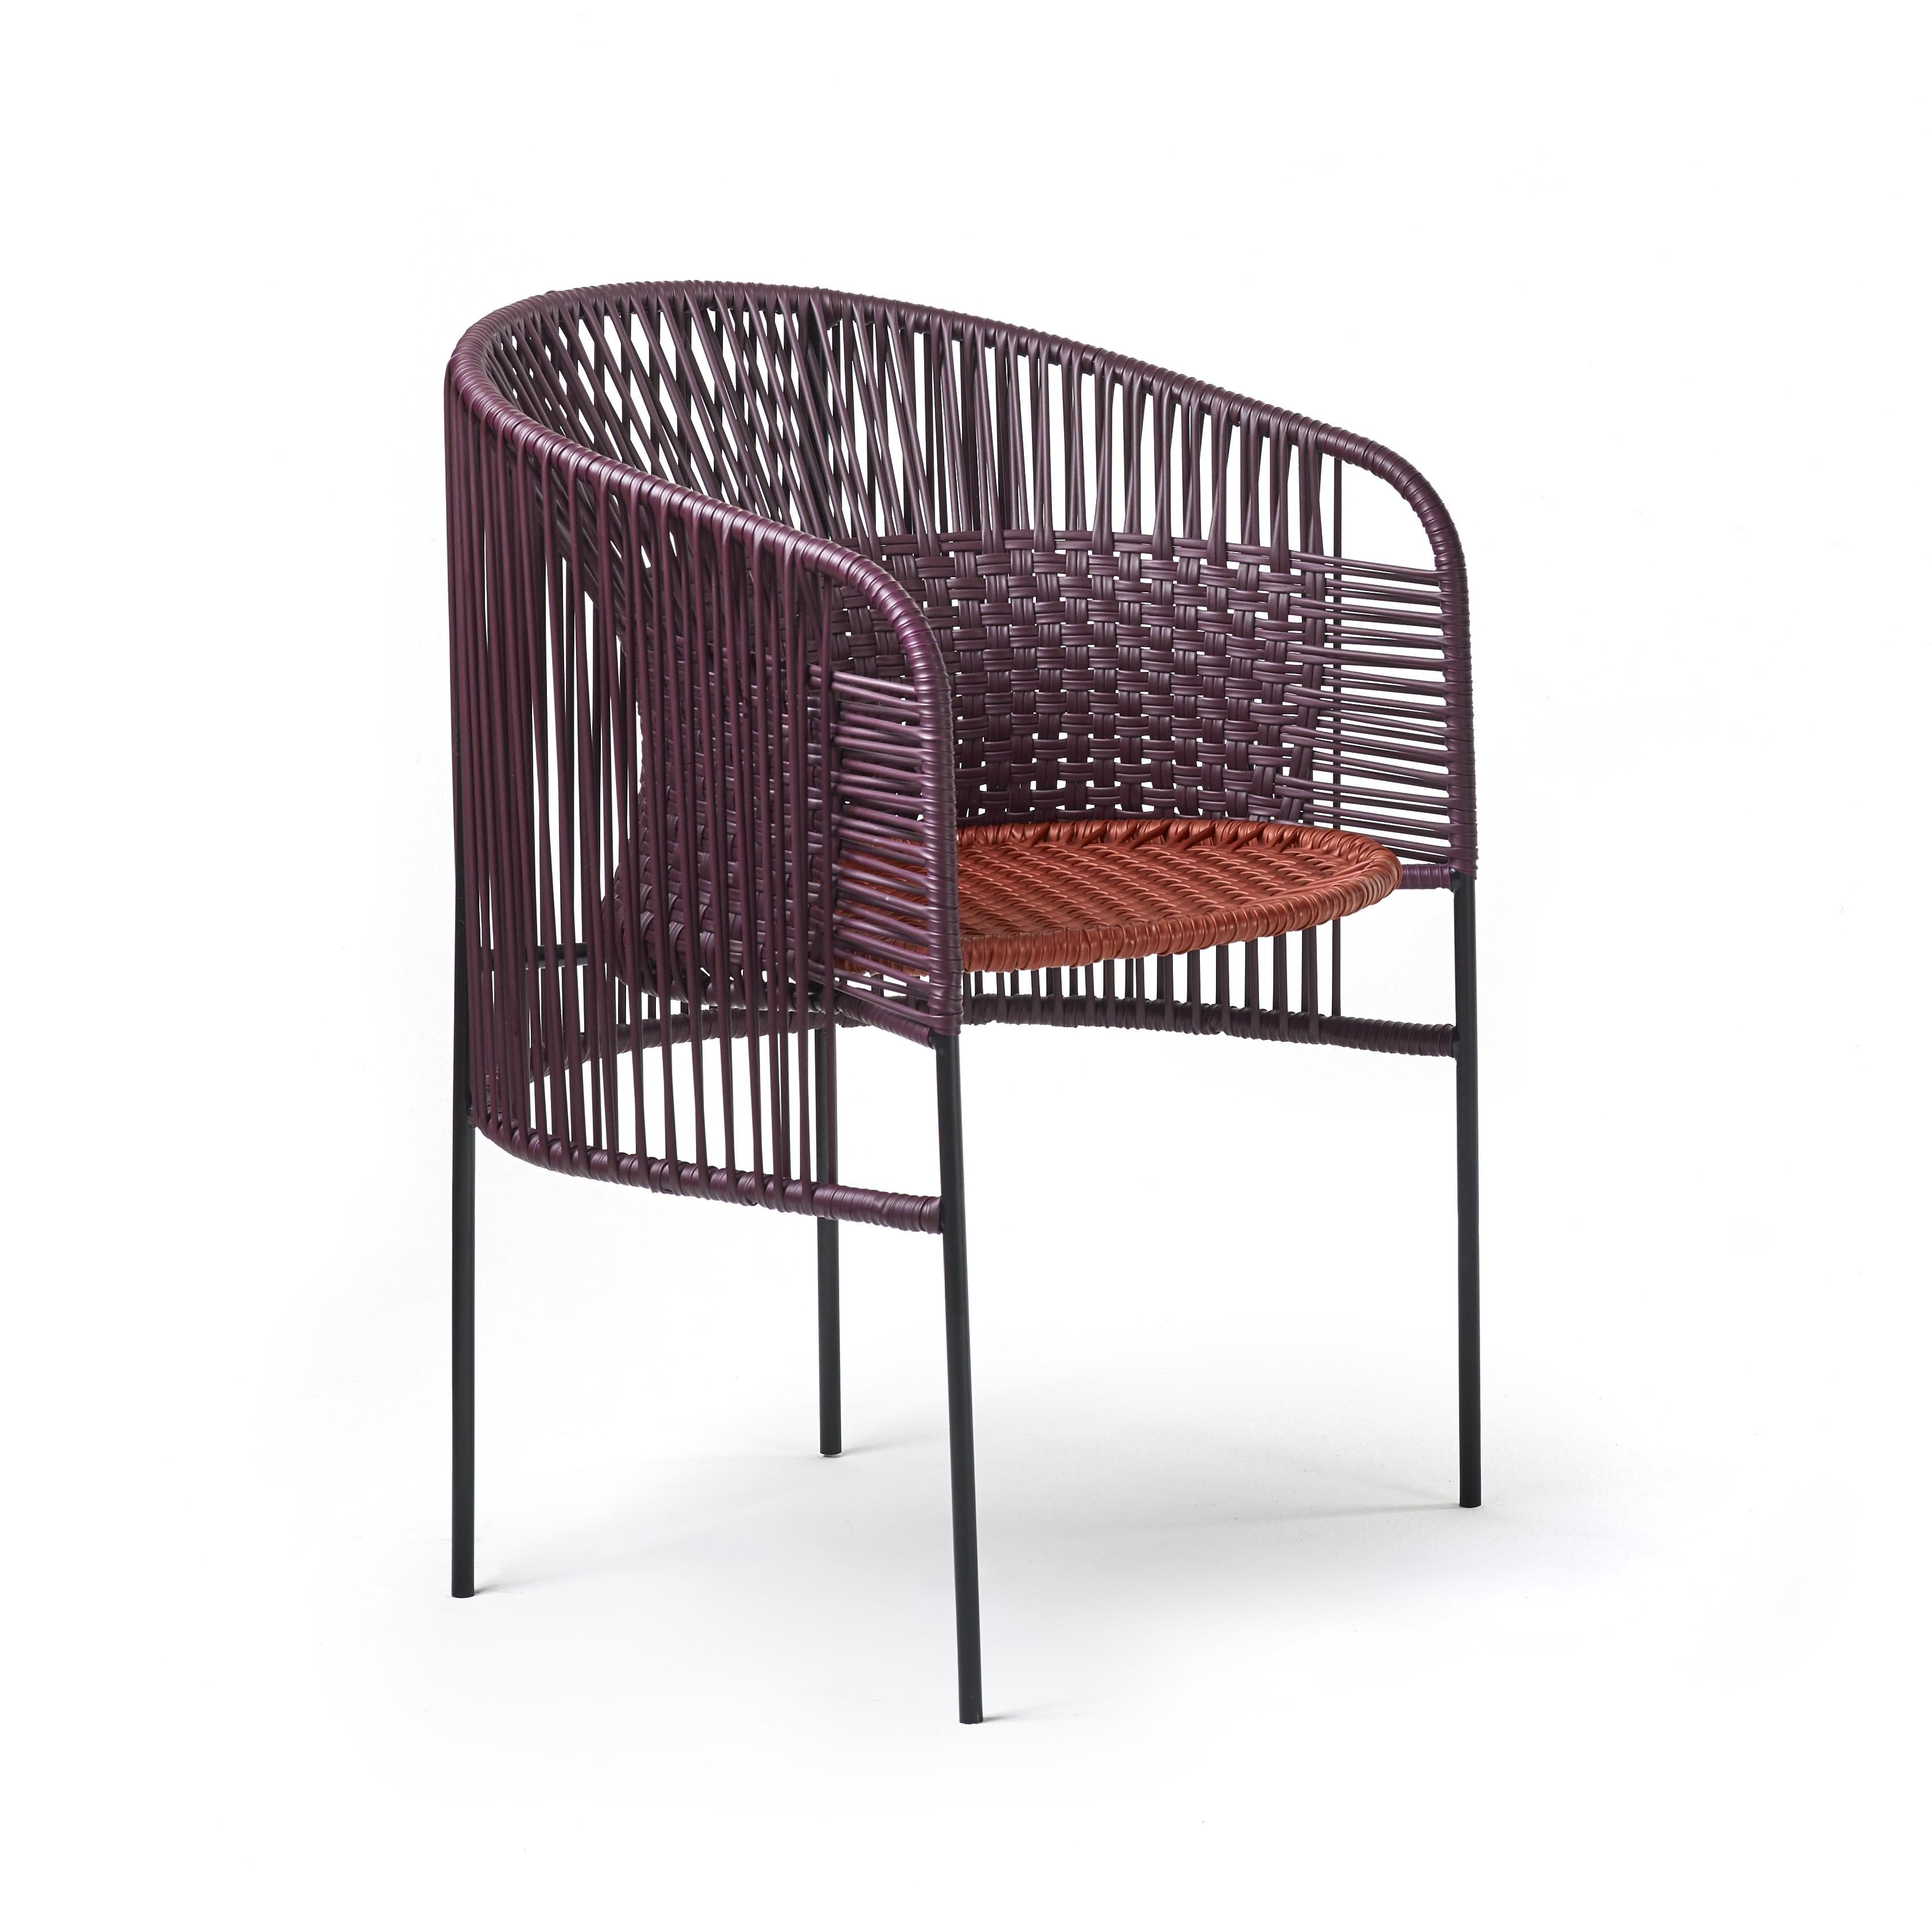 Set of 2 Violet orange caribe chic dining chair by Sebastian Herkner
Materials: Galvanized and powder-coated tubular steel. PVC strings are made from recycled plastic.
Technique: Made from recycled plastic and weaved by local craftspeople in